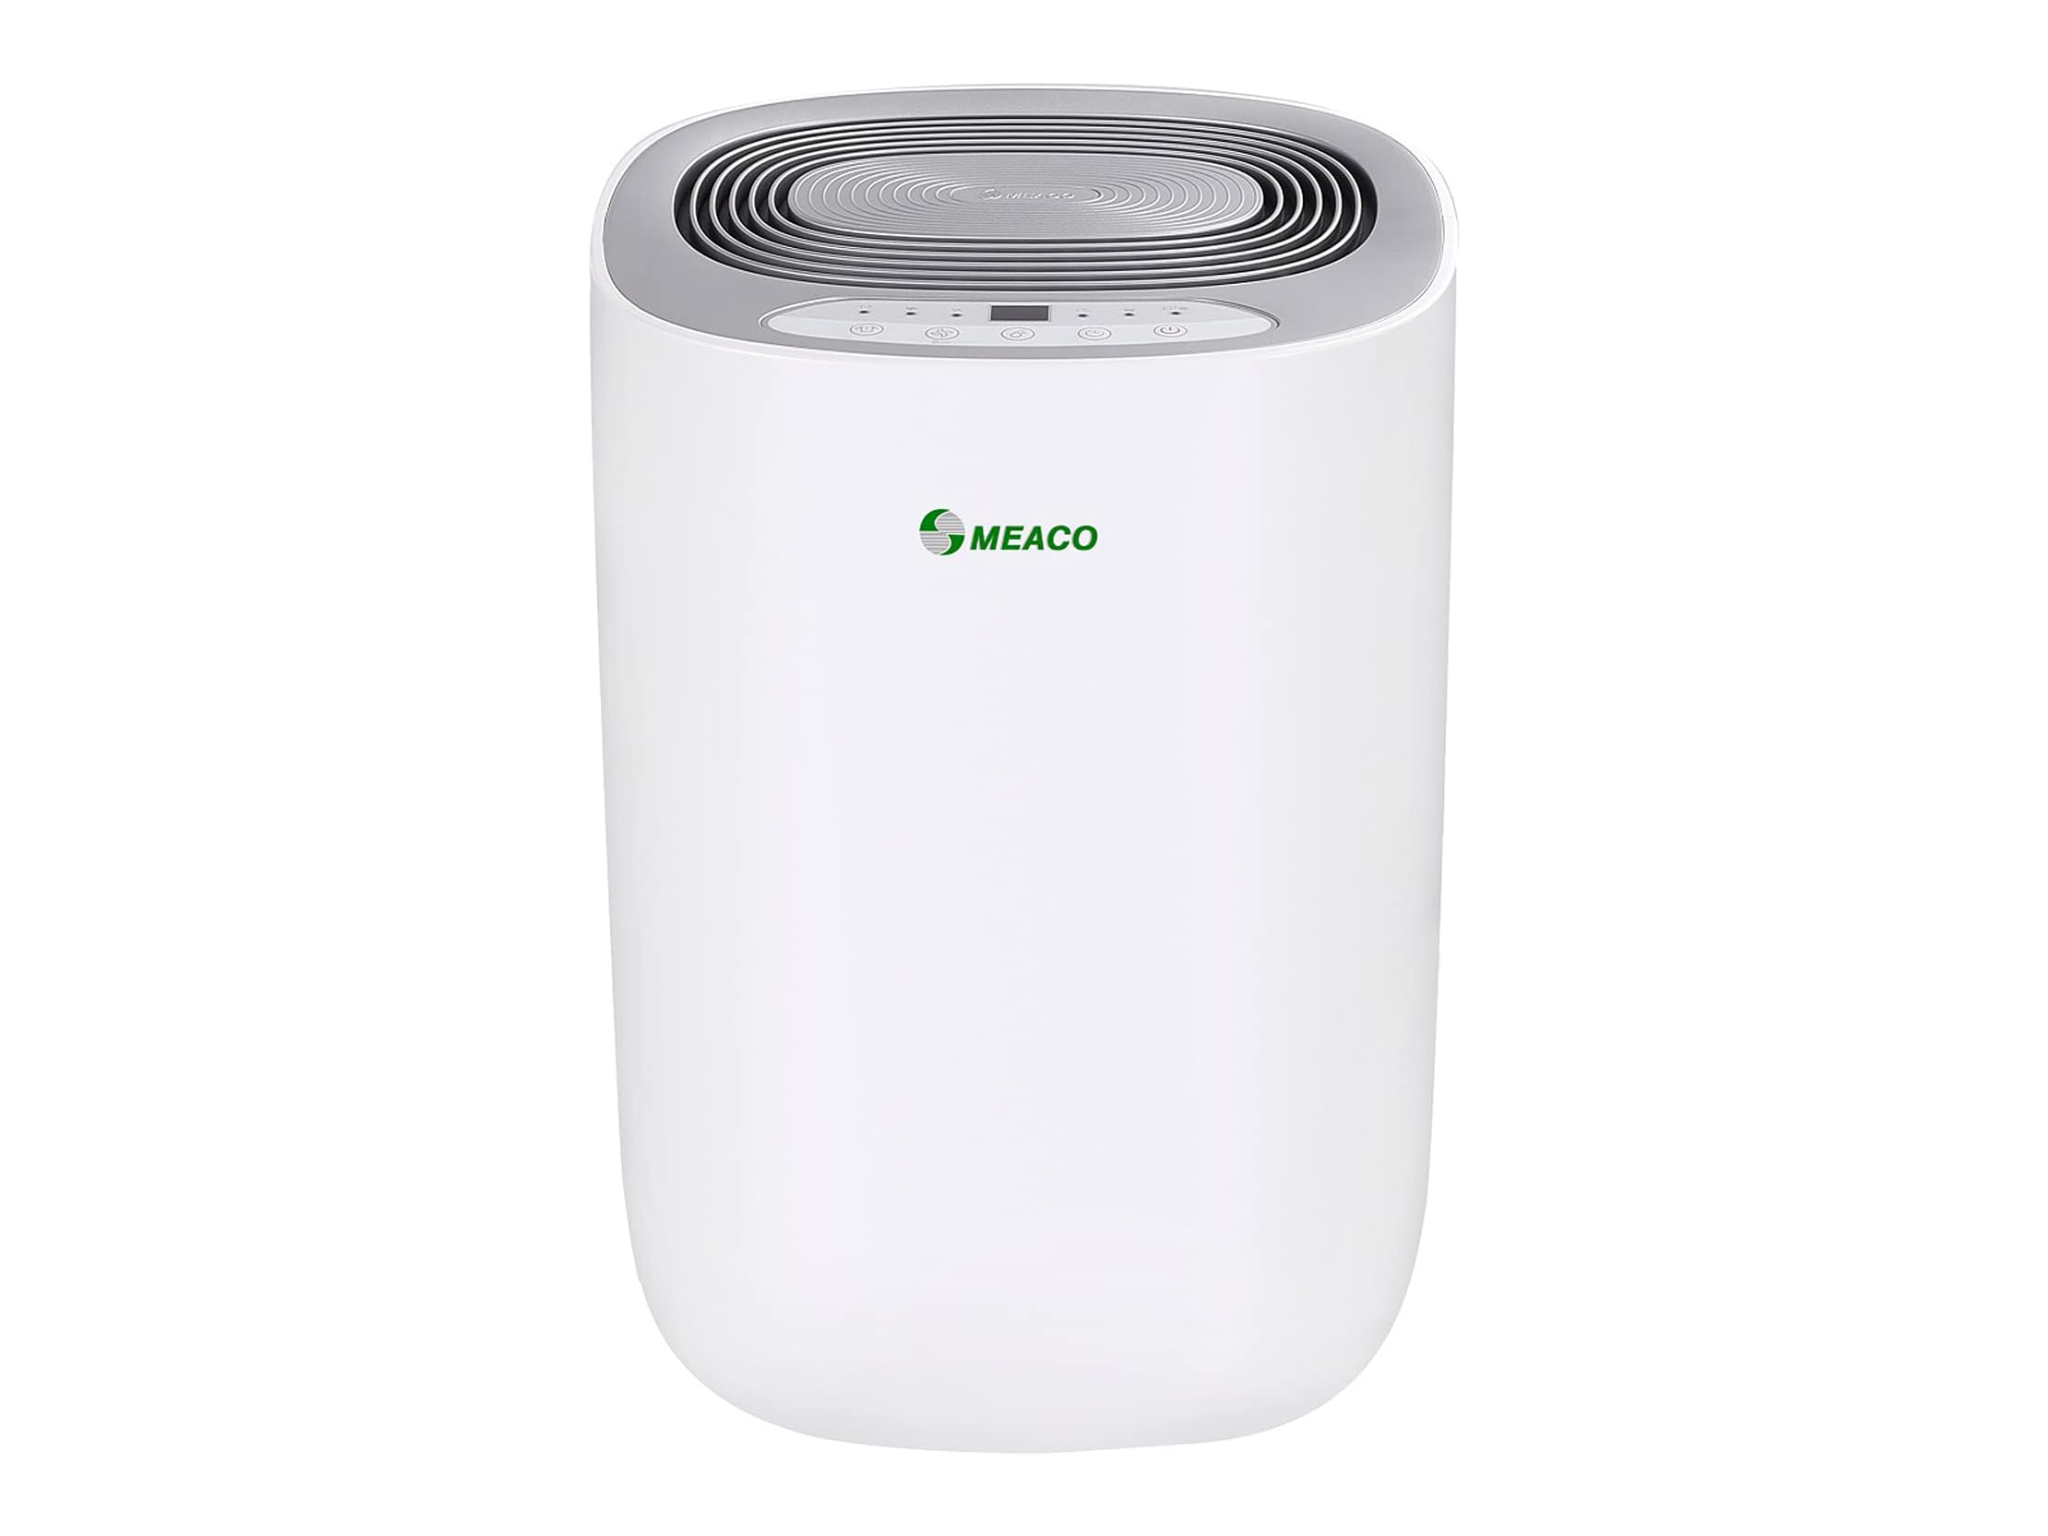 meaco-dehumidifier-indybest-review.png